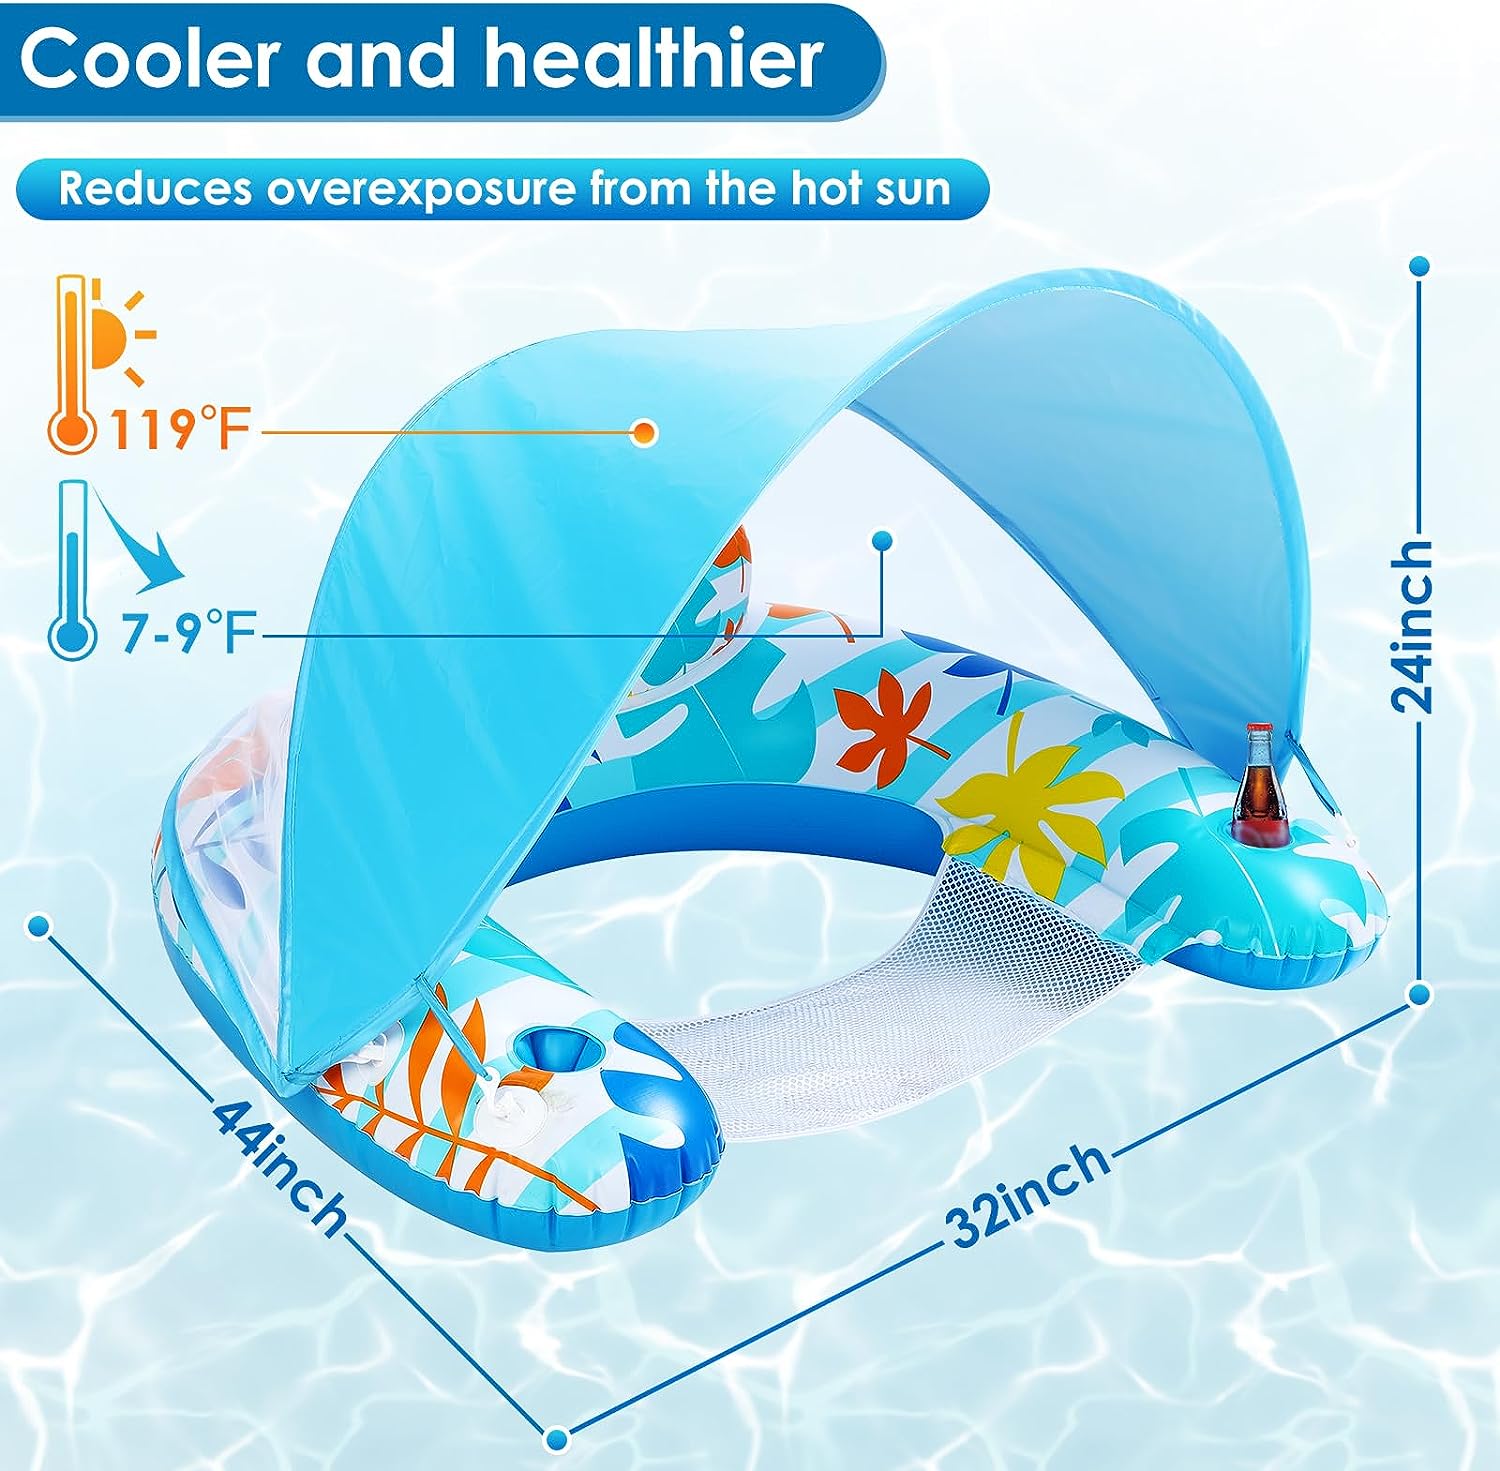 LAYCOL Pool Float with Canopy, Adult Inflatable Pool Chair Leisure Float, Adjustable Visor Cup Holder and Ergonomic Headrest. Pool floats are great for beach activities pool party games, swimming toys